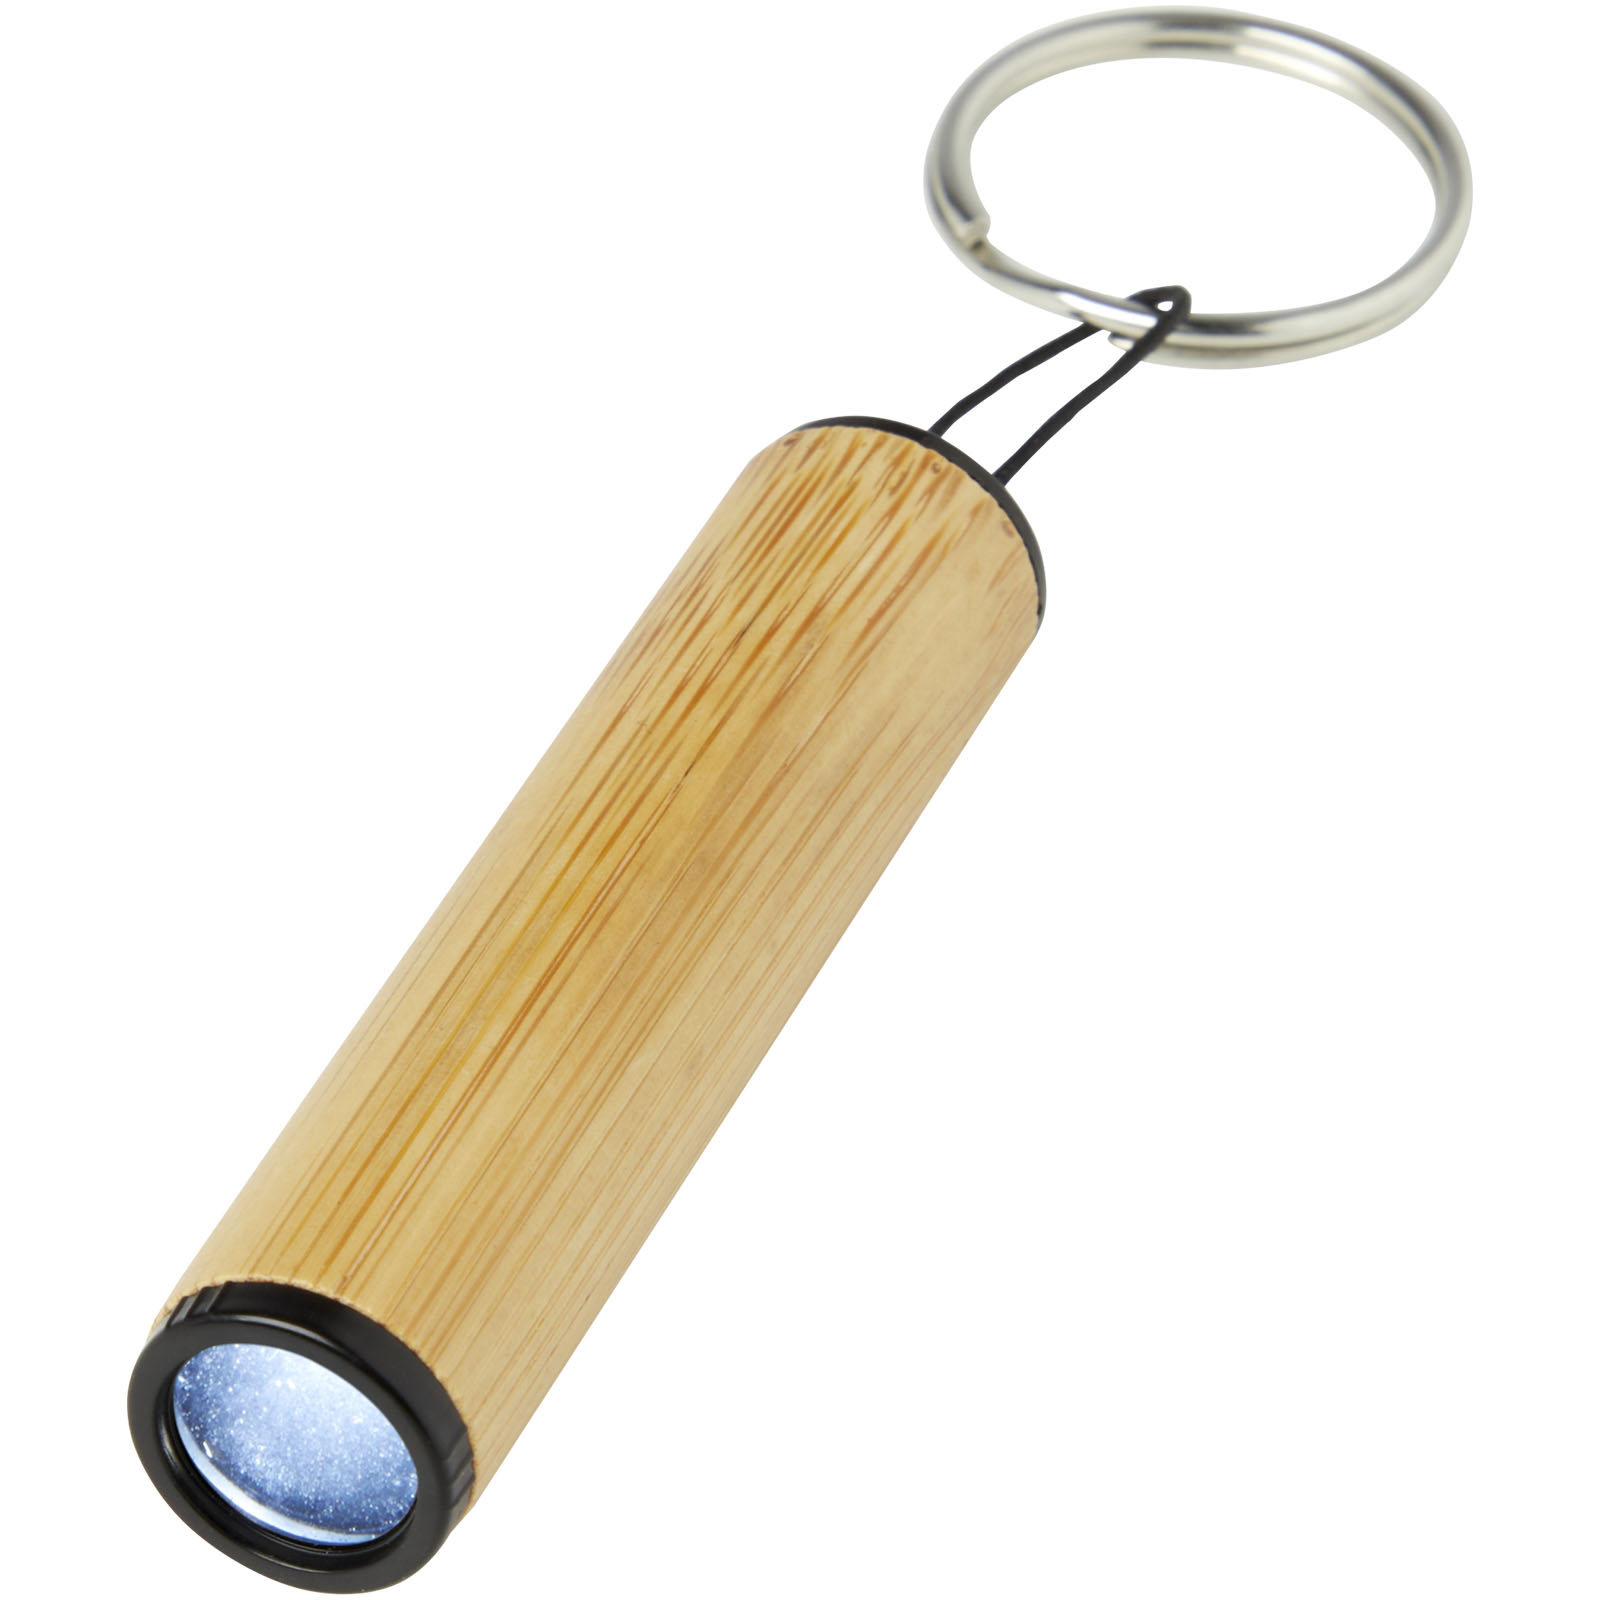 Advertising Lamps - Cane bamboo key ring with light - 2